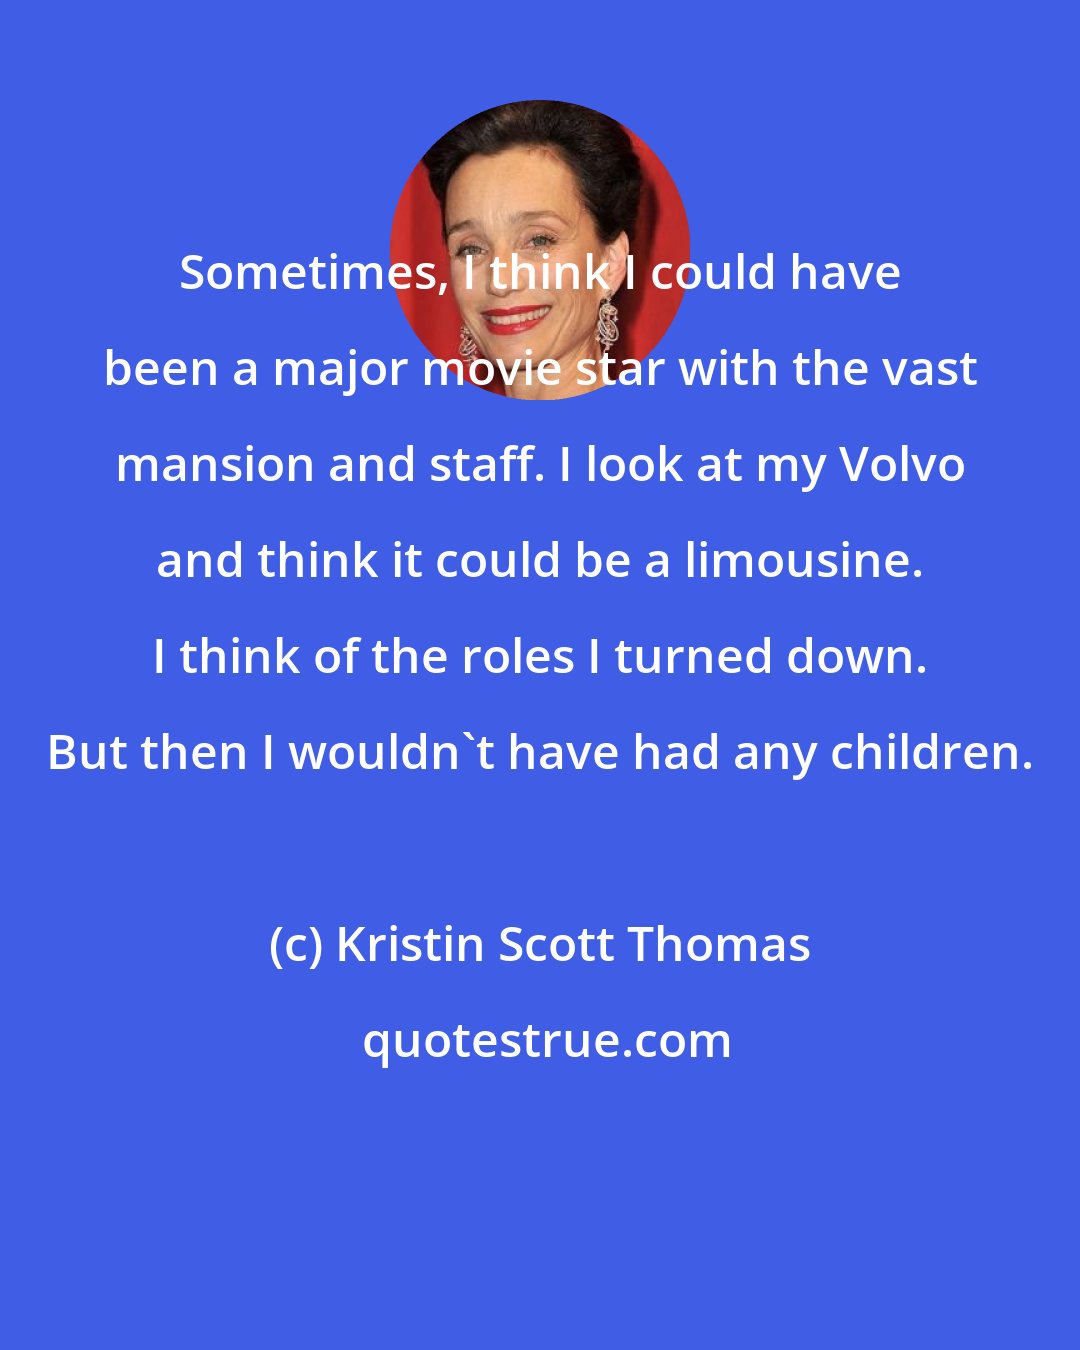 Kristin Scott Thomas: Sometimes, I think I could have been a major movie star with the vast mansion and staff. I look at my Volvo and think it could be a limousine. I think of the roles I turned down. But then I wouldn't have had any children.